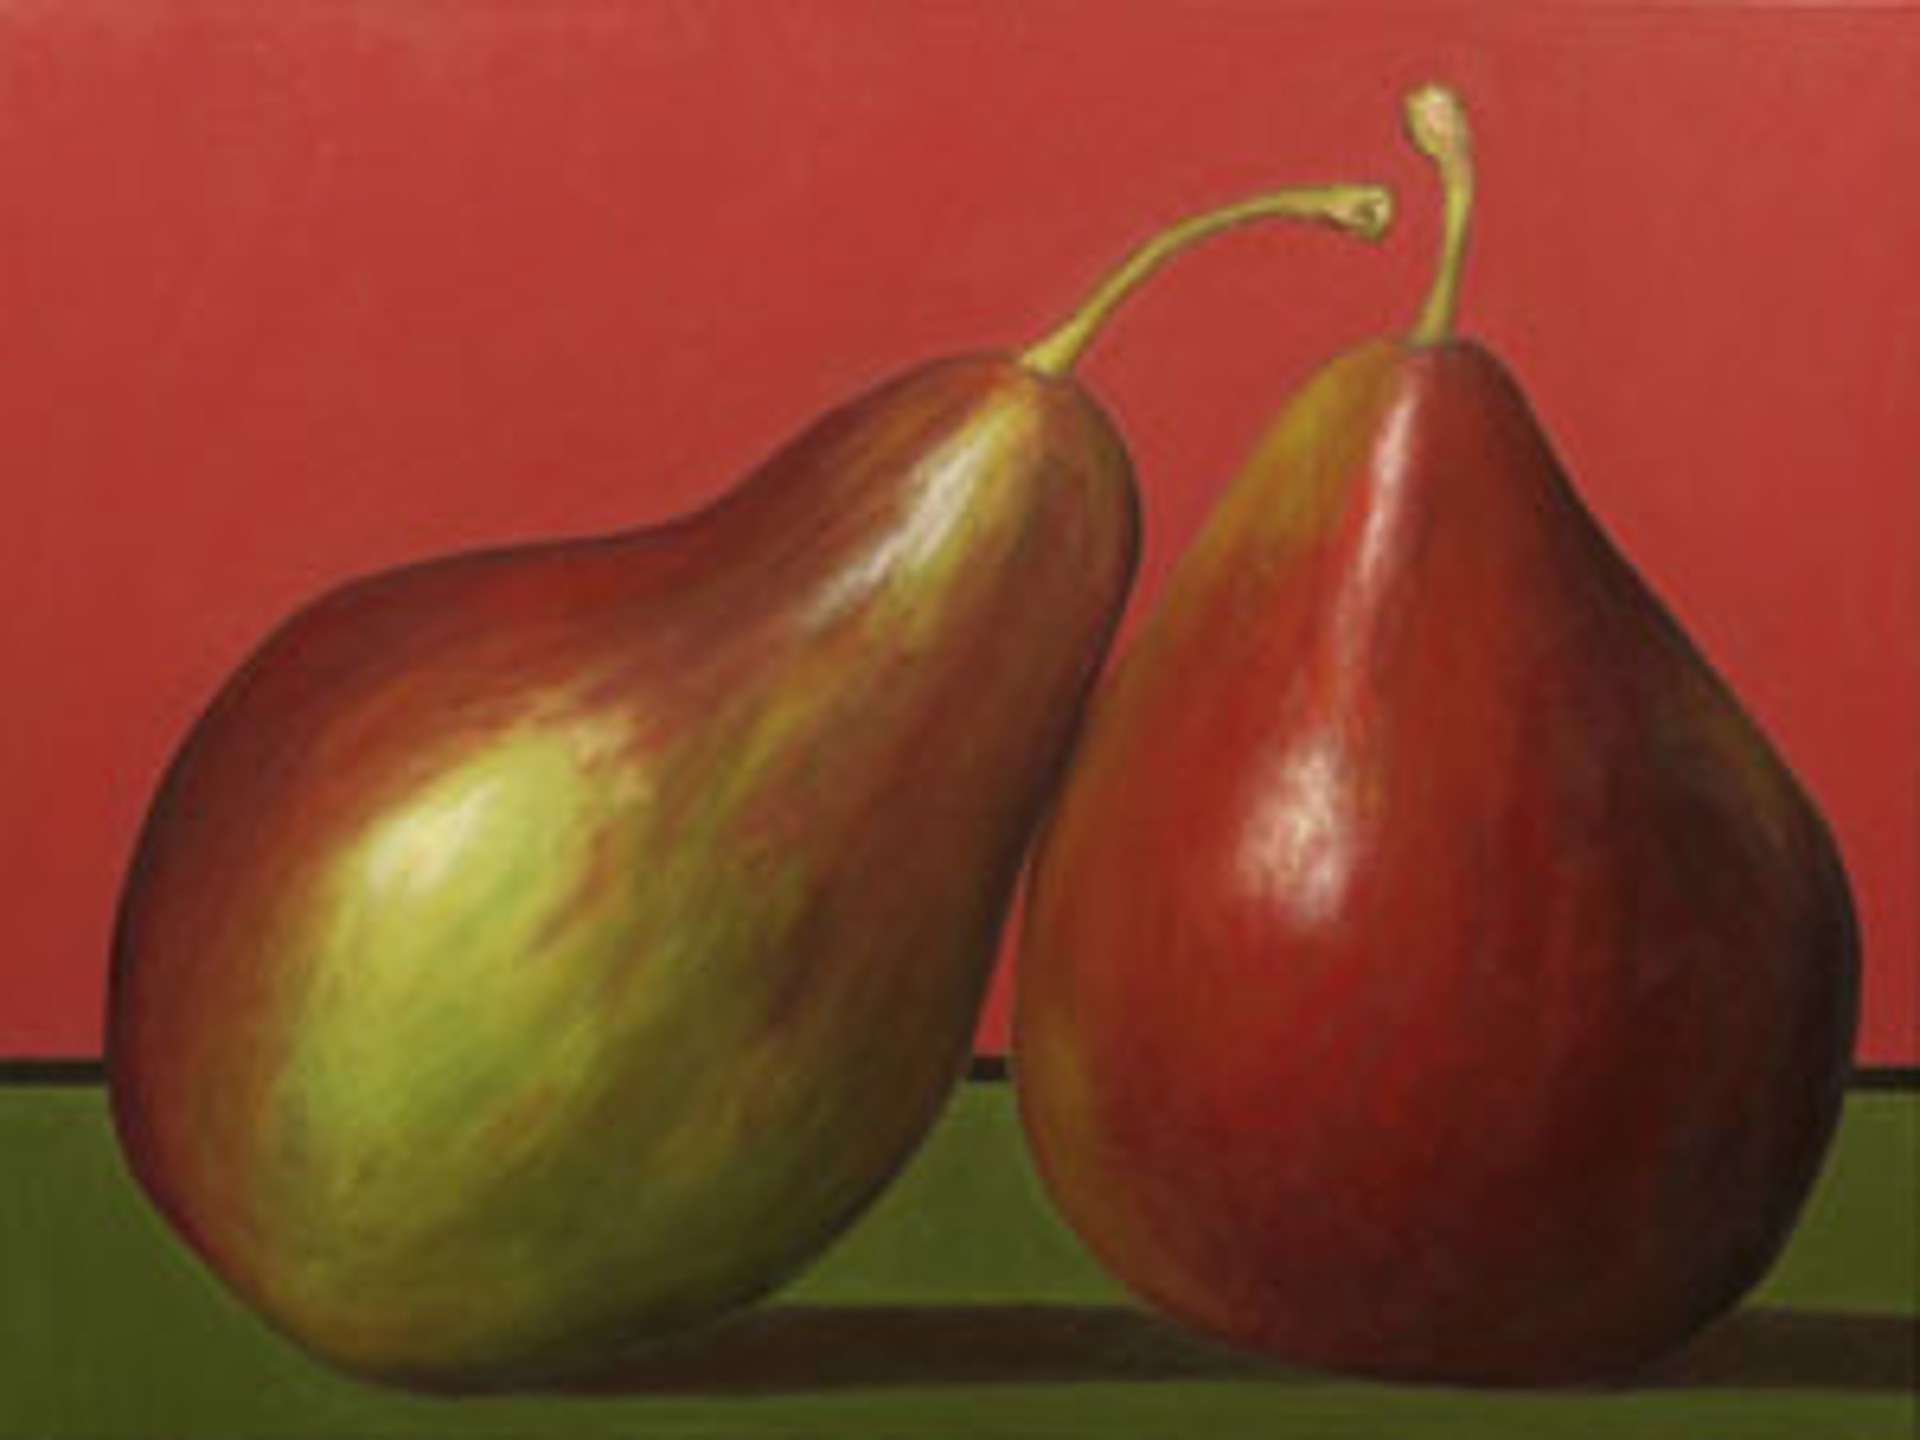 Nestled Pears on Red by Bill Chisholm